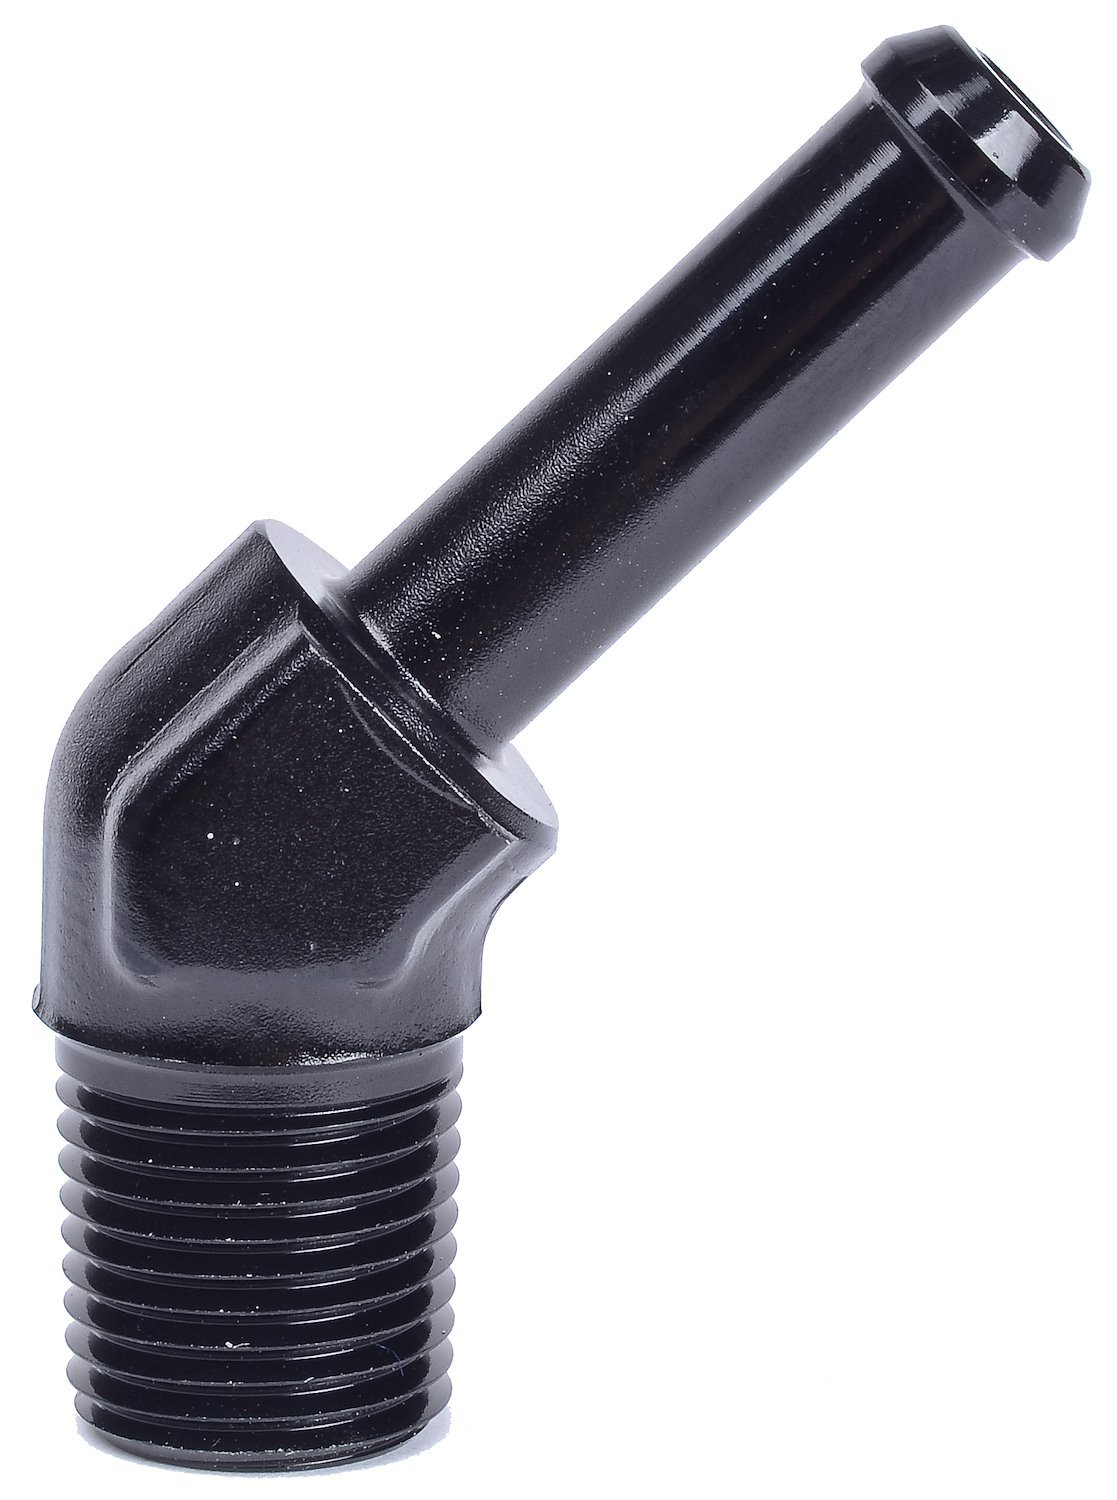 NPT to Hose Barb Fitting, 45-Degree [1/8 in. NPT Male to 1/4 in. I.D. Hose, Black]